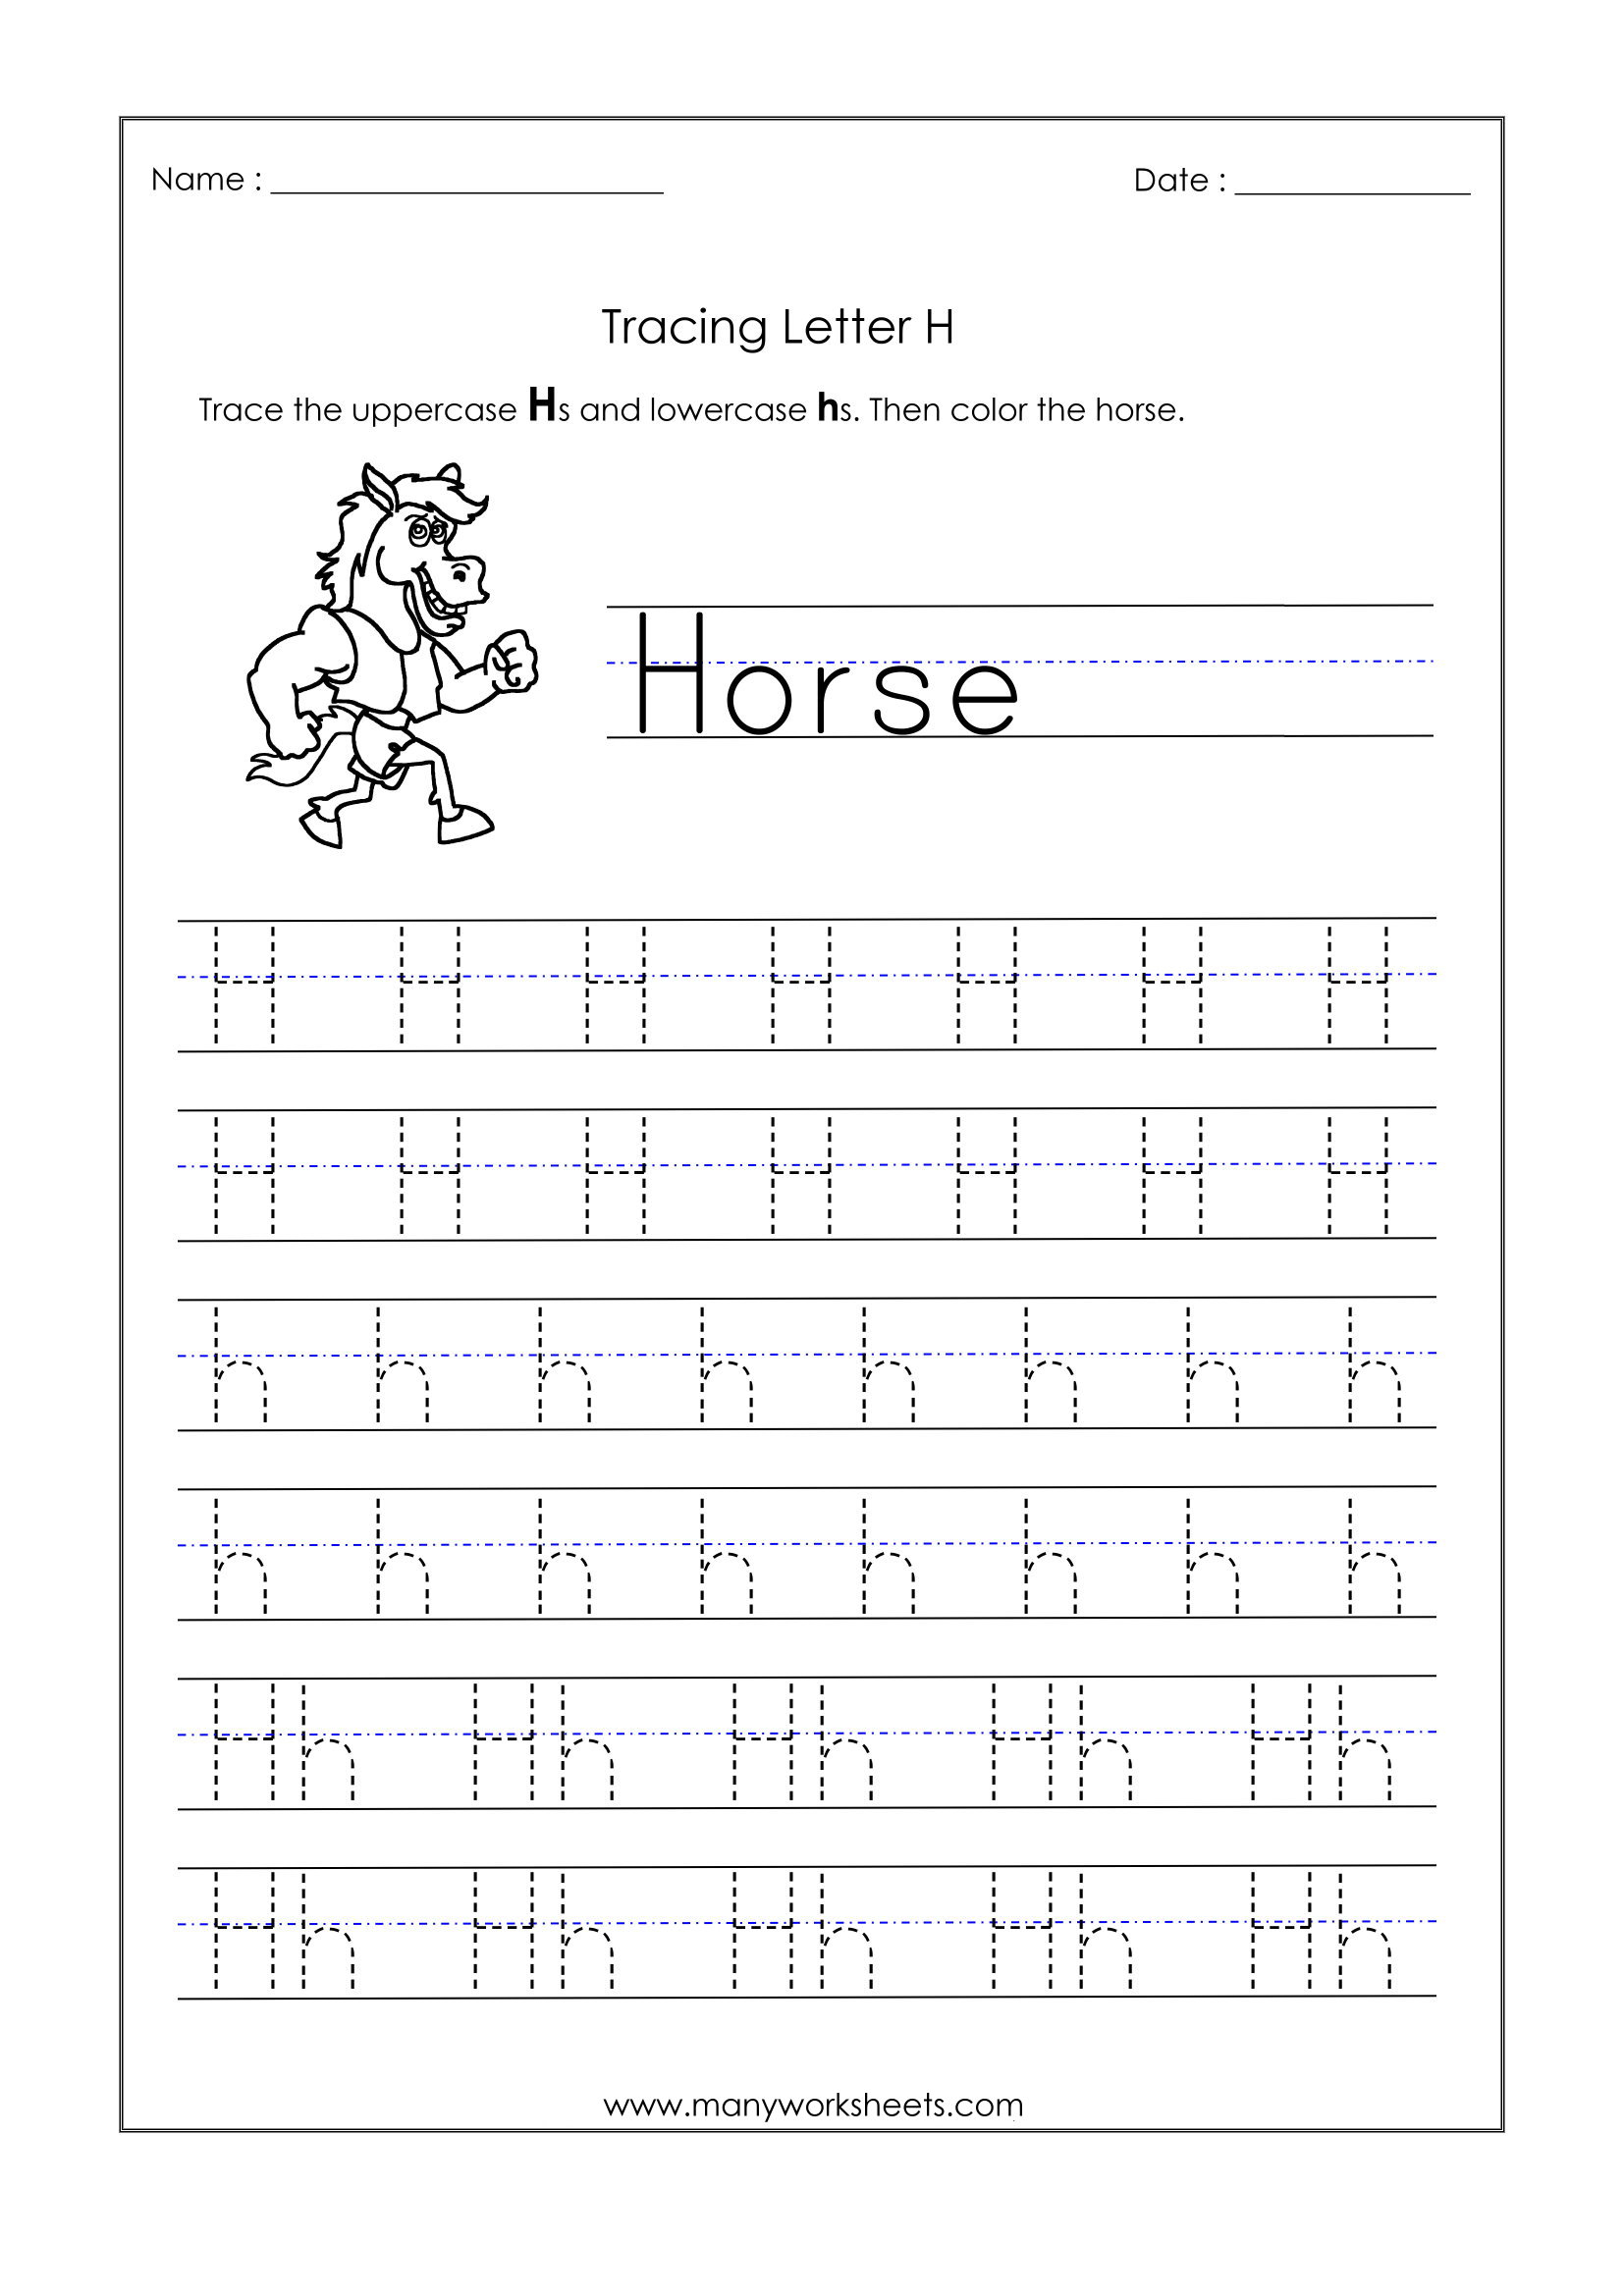 5-best-images-of-letter-h-writing-worksheets-printable-letter-h-pin